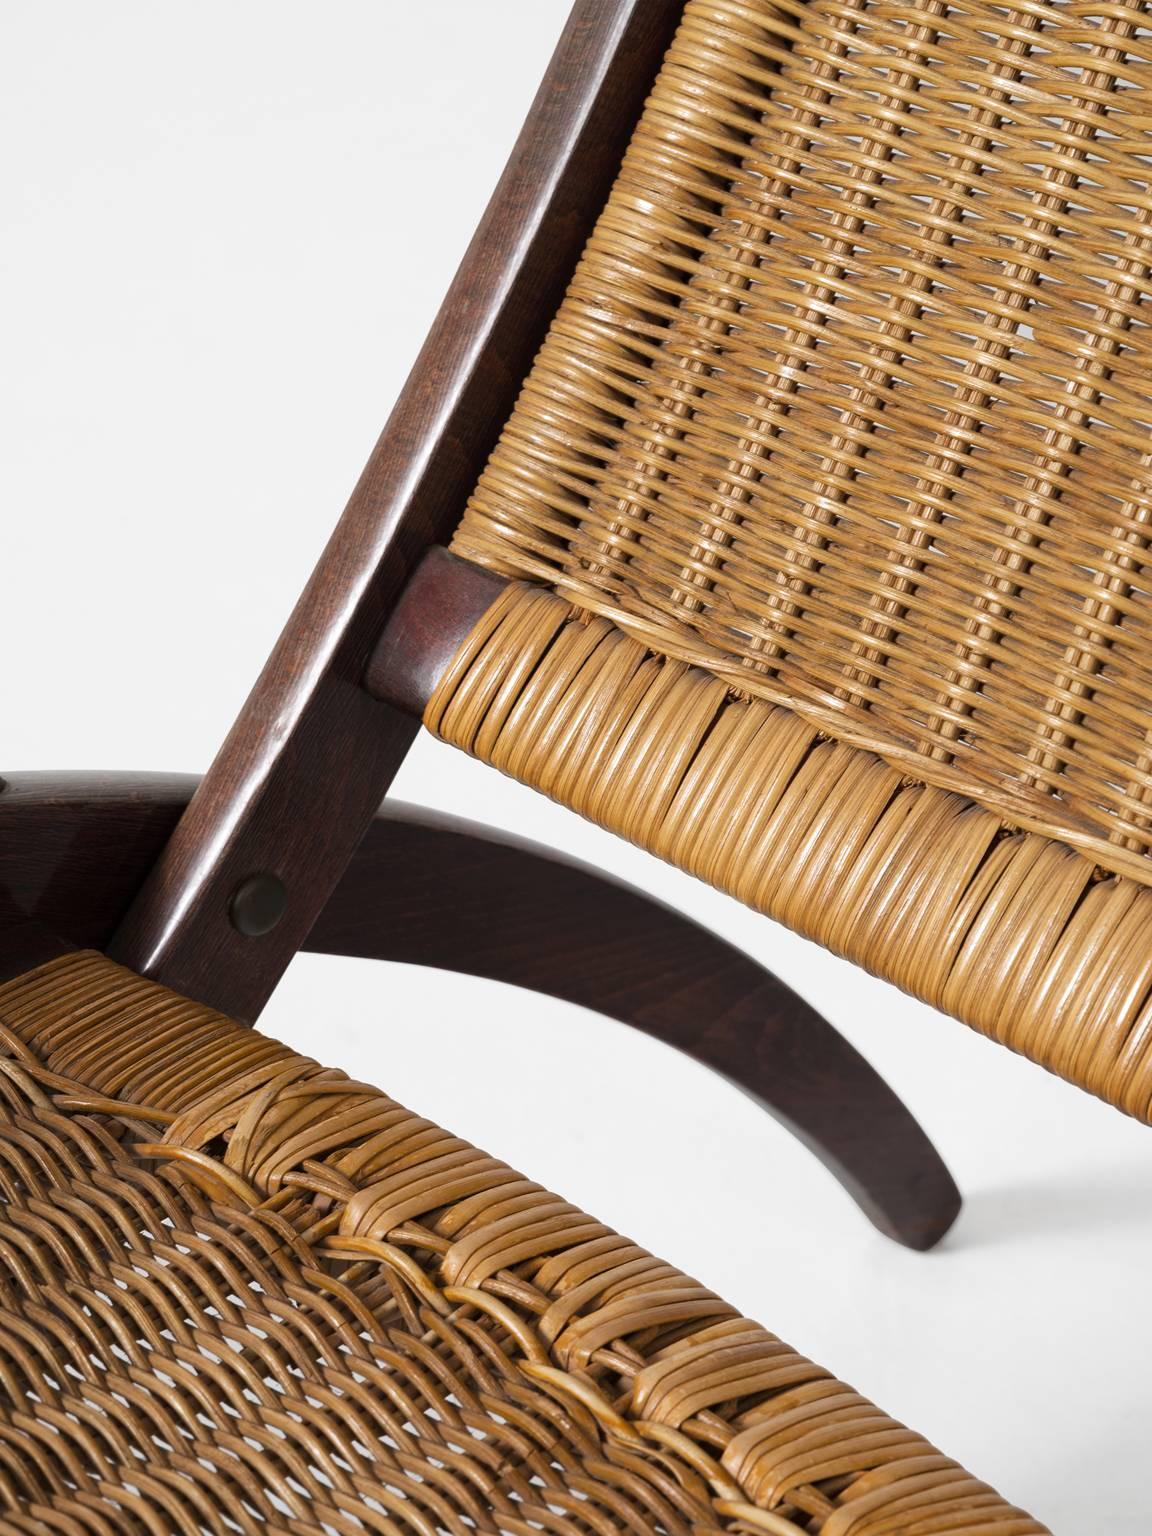 Mid-20th Century Gio Ponti Rare 'Nifea' Folding Chair with Woven Cane Seating and Back